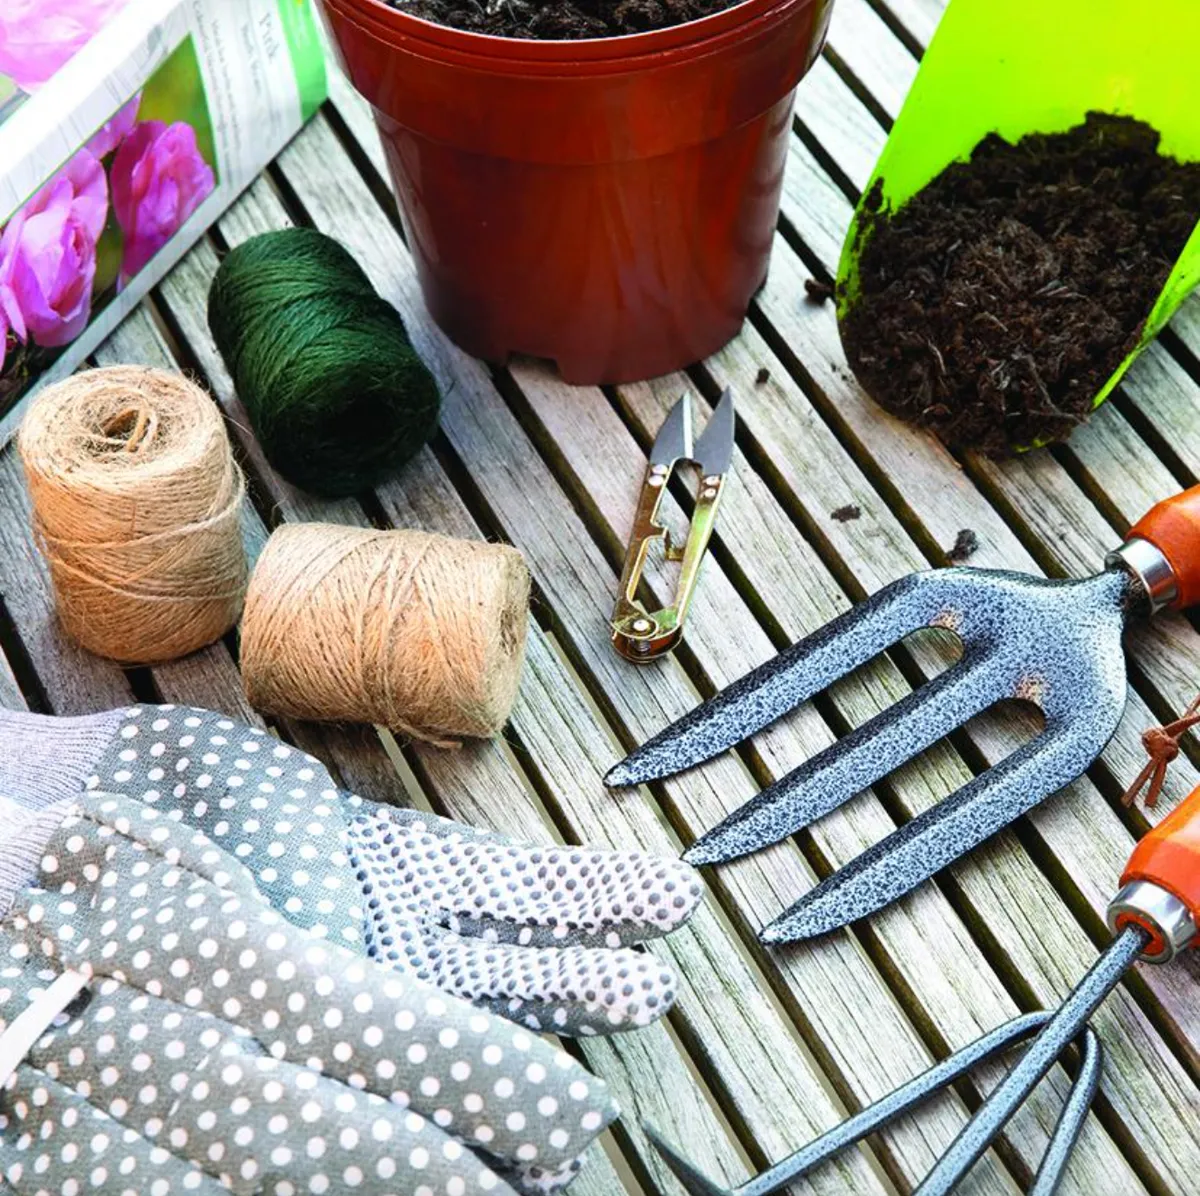 You don’t need to spend a fortune on tools for the garden, as you can pick up things like trowels, spades, gloves and twine at Poundland